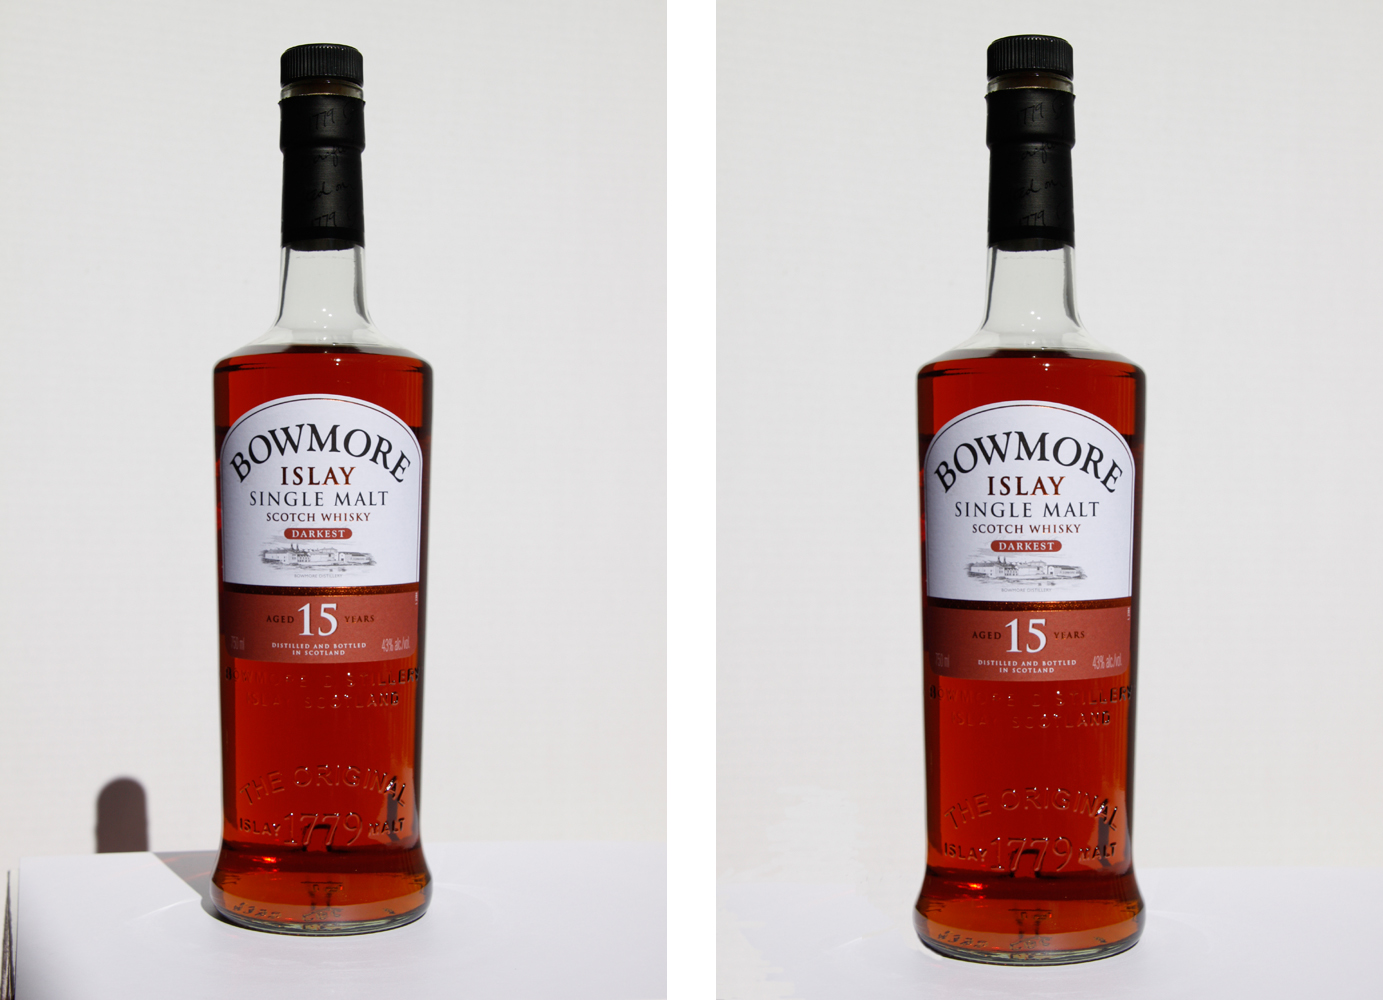 Bowmore Islay Scotch product photography